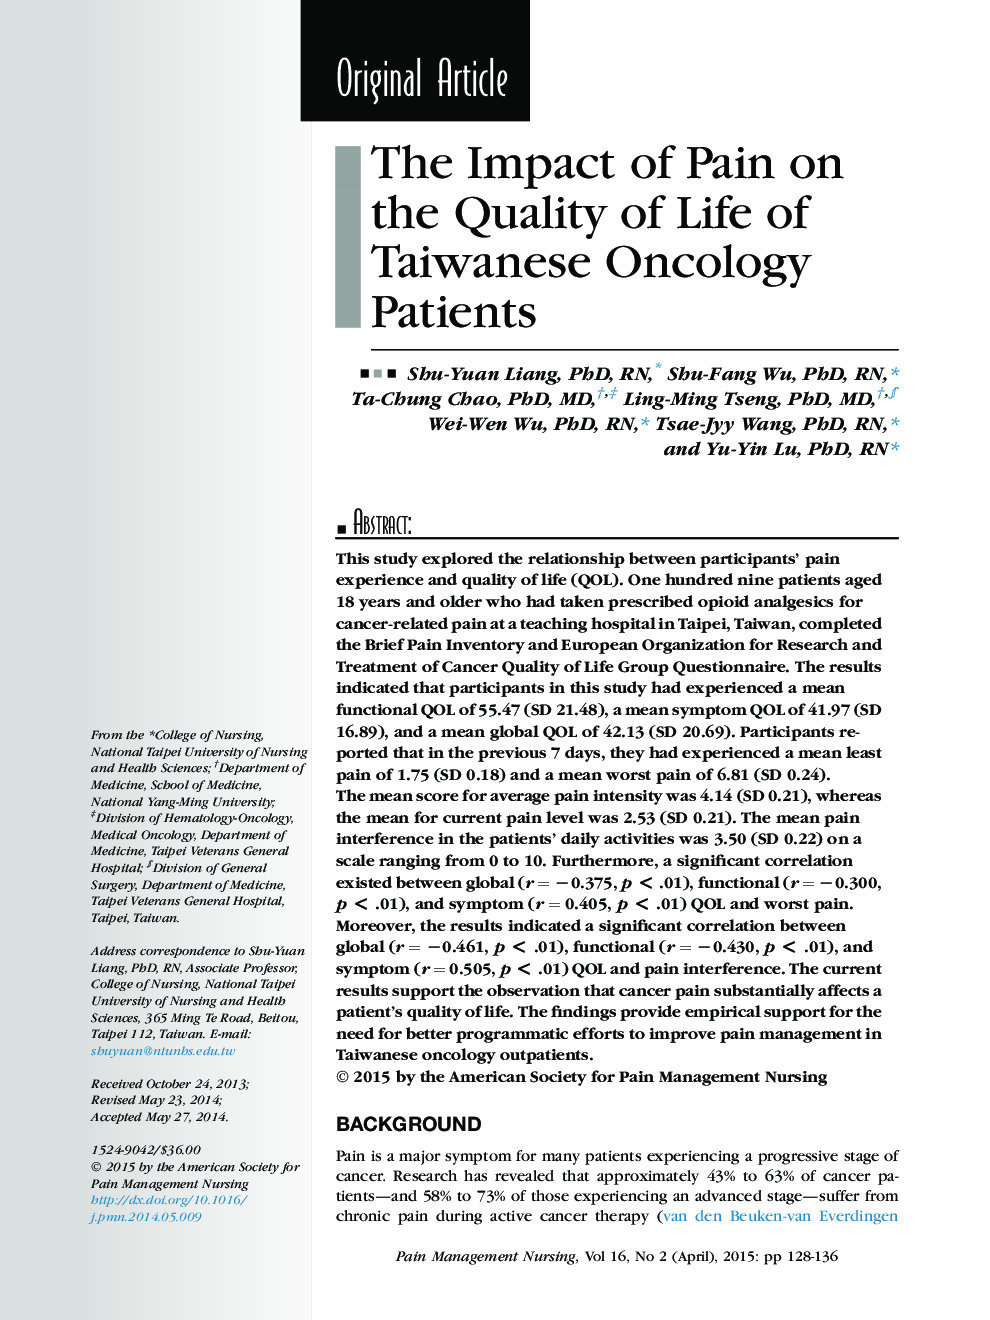 The Impact of Pain on the Quality of Life of Taiwanese Oncology Patients